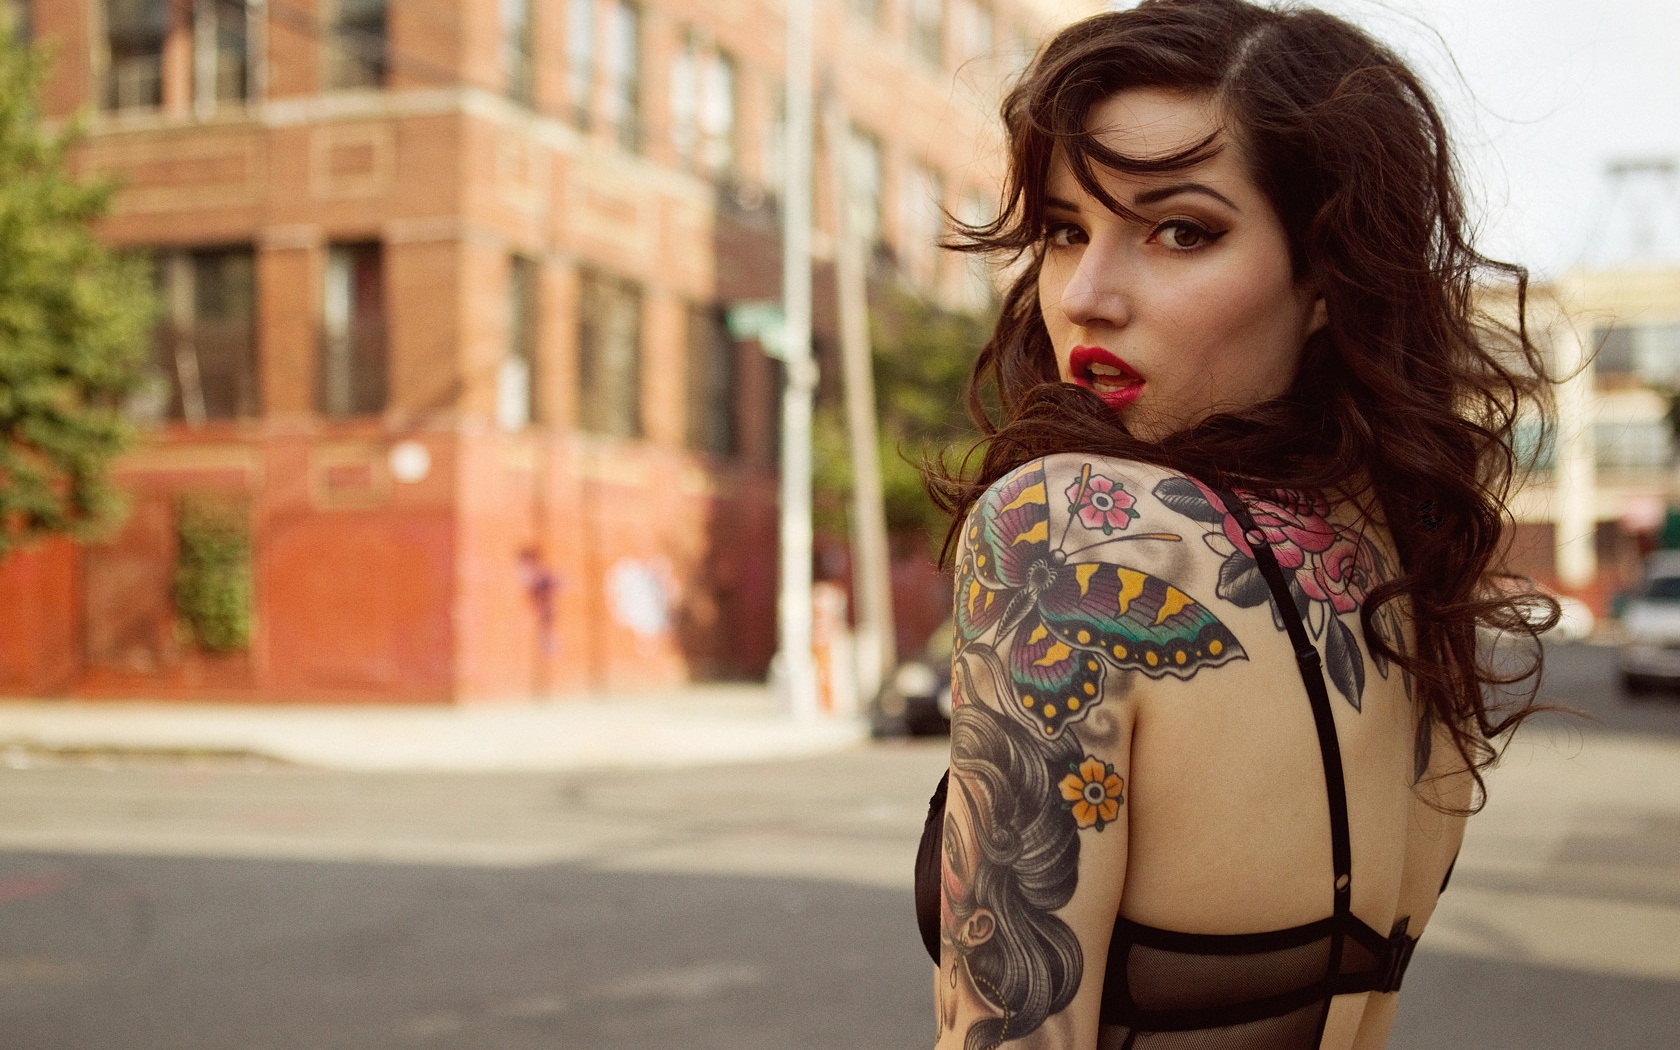 Girls With Tattoos Wallpaper